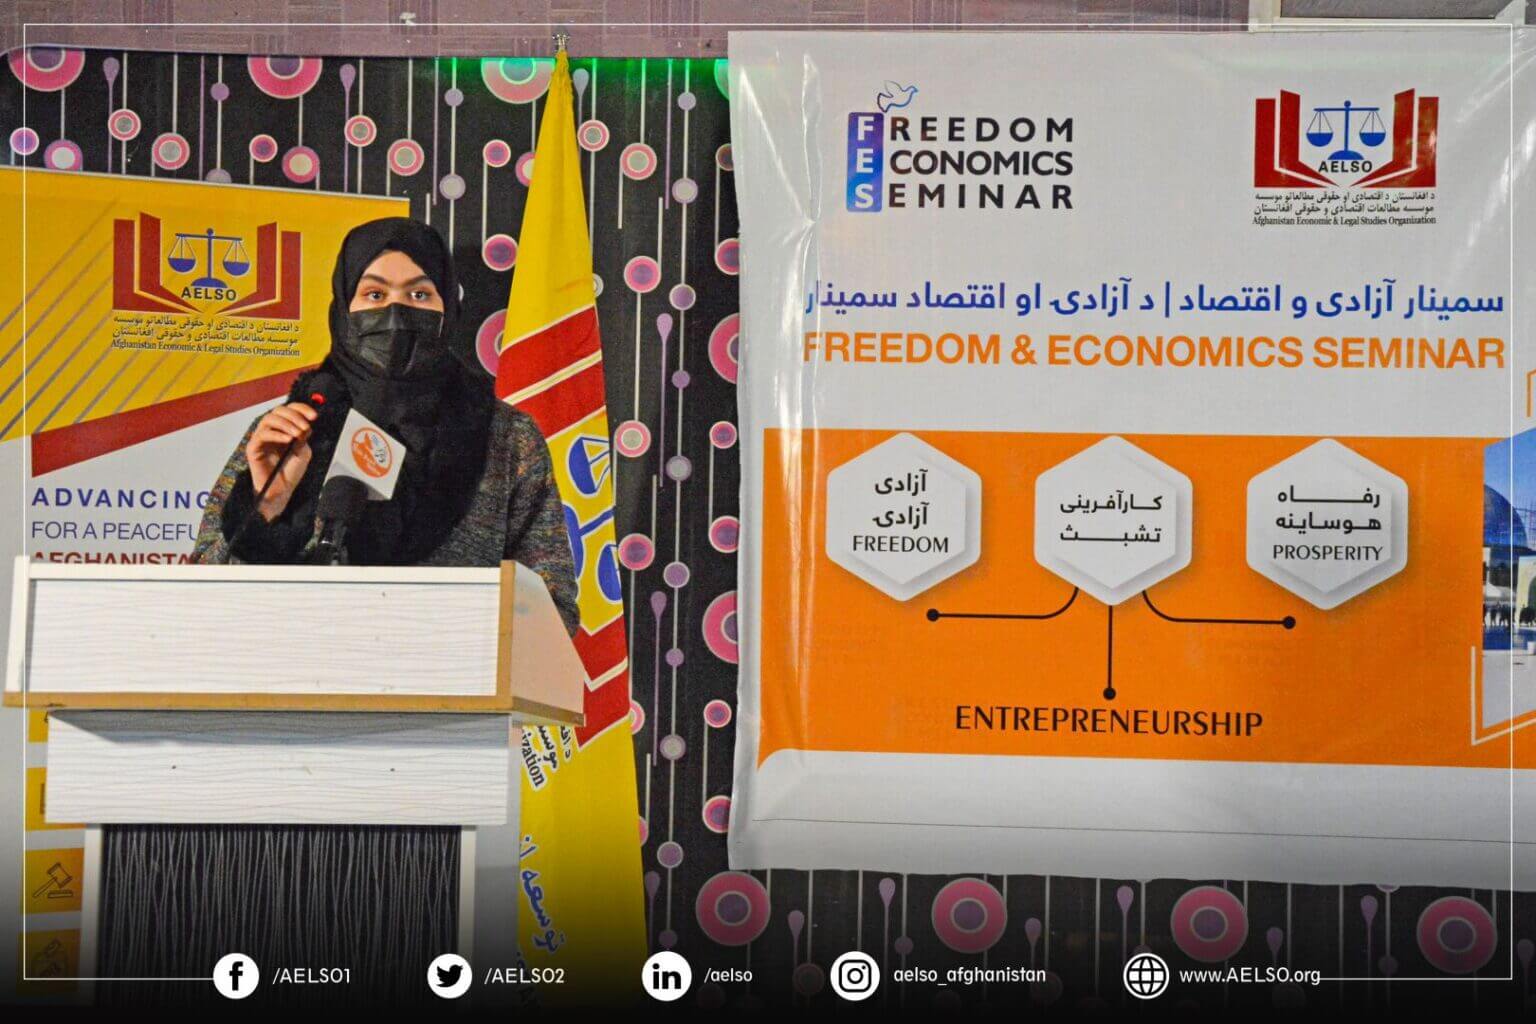 Asma Karimi, another participant of Freedom & Economics Seminar in Balkh Province